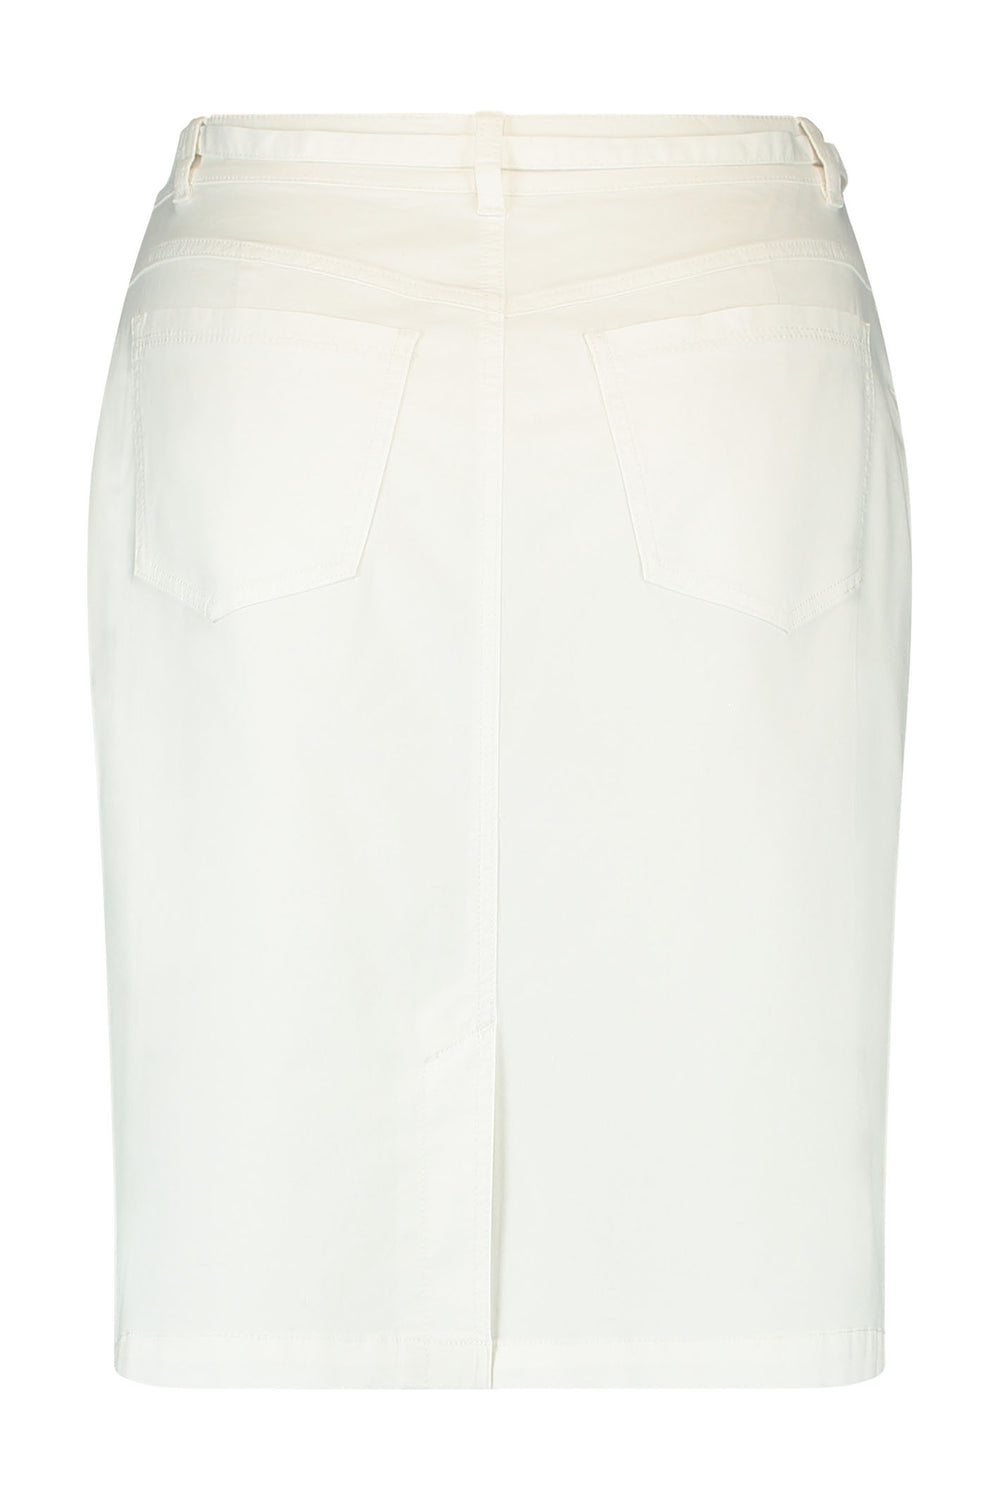 Gerry Weber 211006-66218 White Jean Style Skirt - Dotique Chesterfield